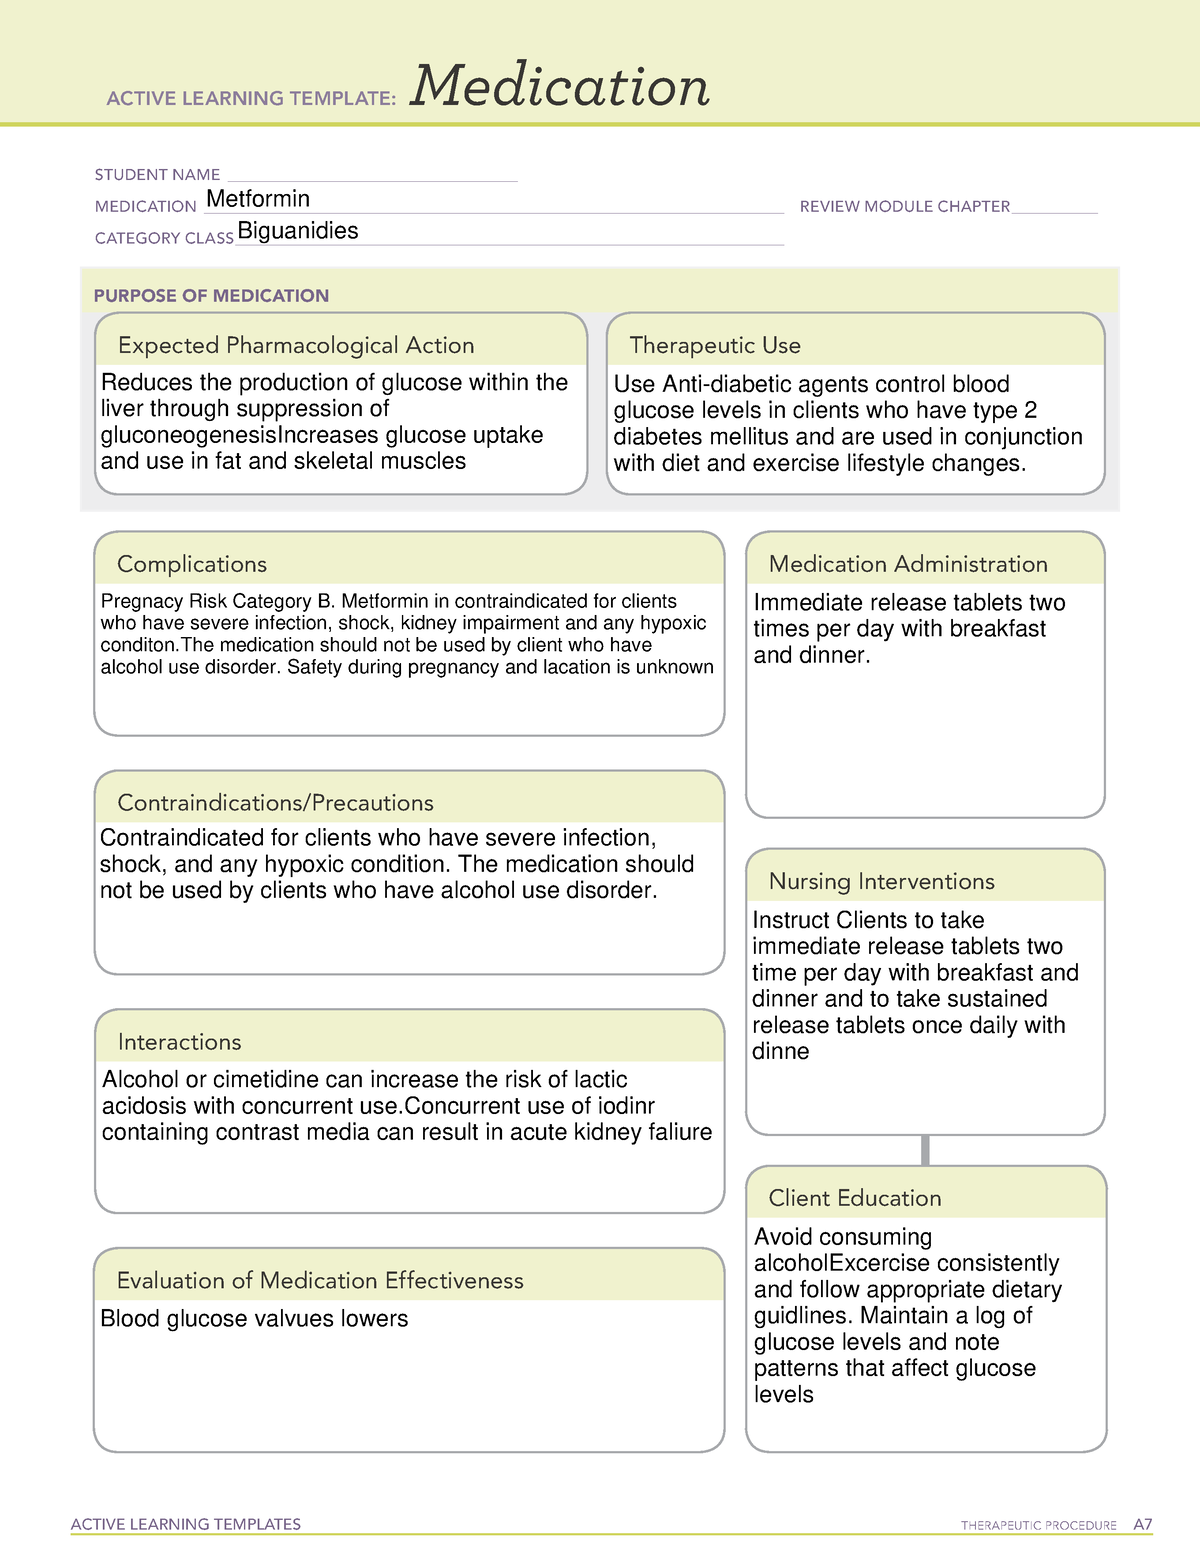 Metformin medication template ACTIVE LEARNING TEMPLATES THERAPEUTIC